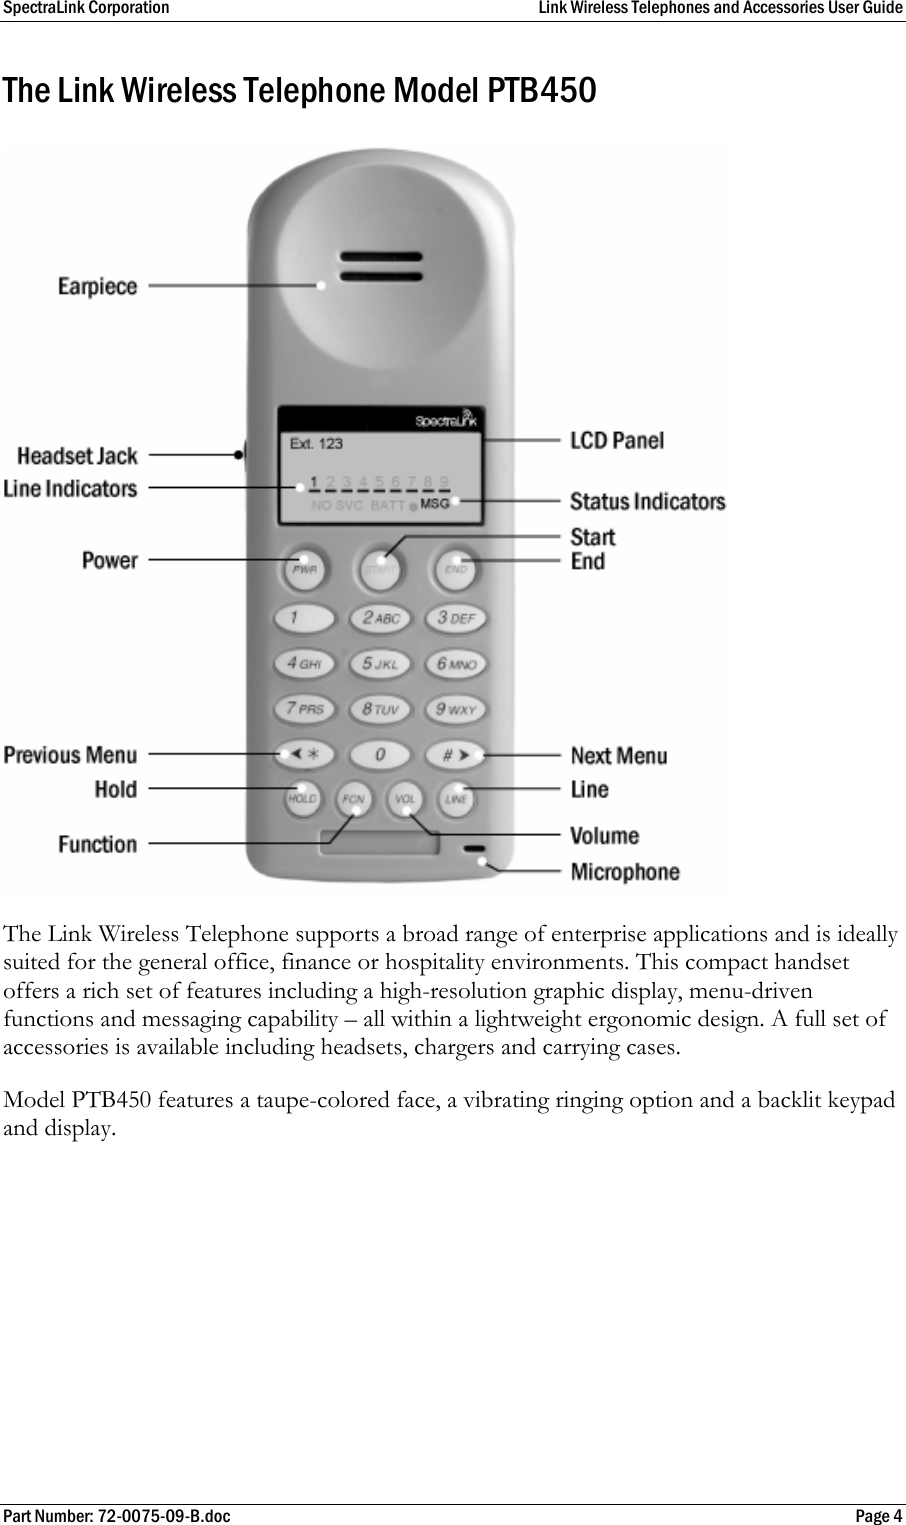 SpectraLink Corporation  Link Wireless Telephones and Accessories User Guide Part Number: 72-0075-09-B.doc  Page 4 The Link Wireless Telephone Model PTB450 The Link Wireless Telephone supports a broad range of enterprise applications and is ideally suited for the general office, finance or hospitality environments. This compact handset offers a rich set of features including a high-resolution graphic display, menu-driven functions and messaging capability – all within a lightweight ergonomic design. A full set of accessories is available including headsets, chargers and carrying cases. Model PTB450 features a taupe-colored face, a vibrating ringing option and a backlit keypad and display. 